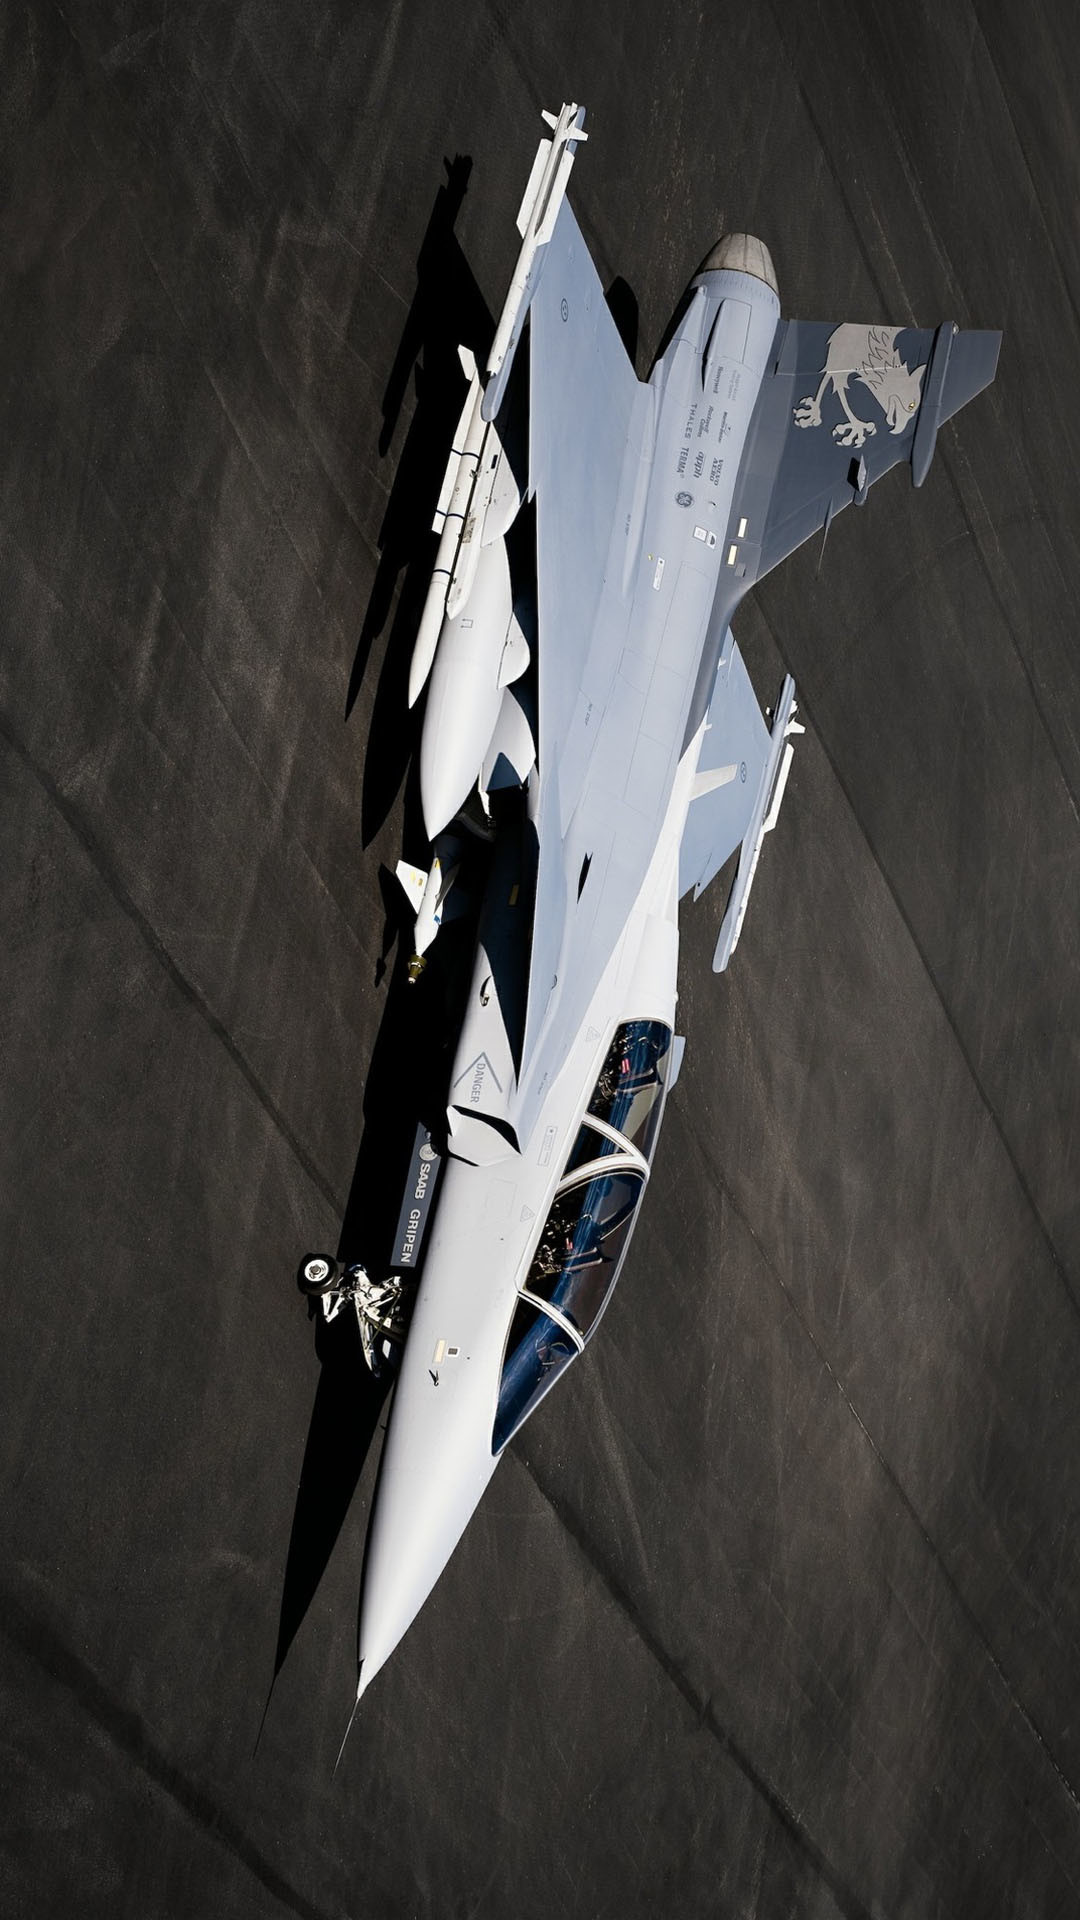 1080x1920 Air Force iphone wallpaper tumblr hipster